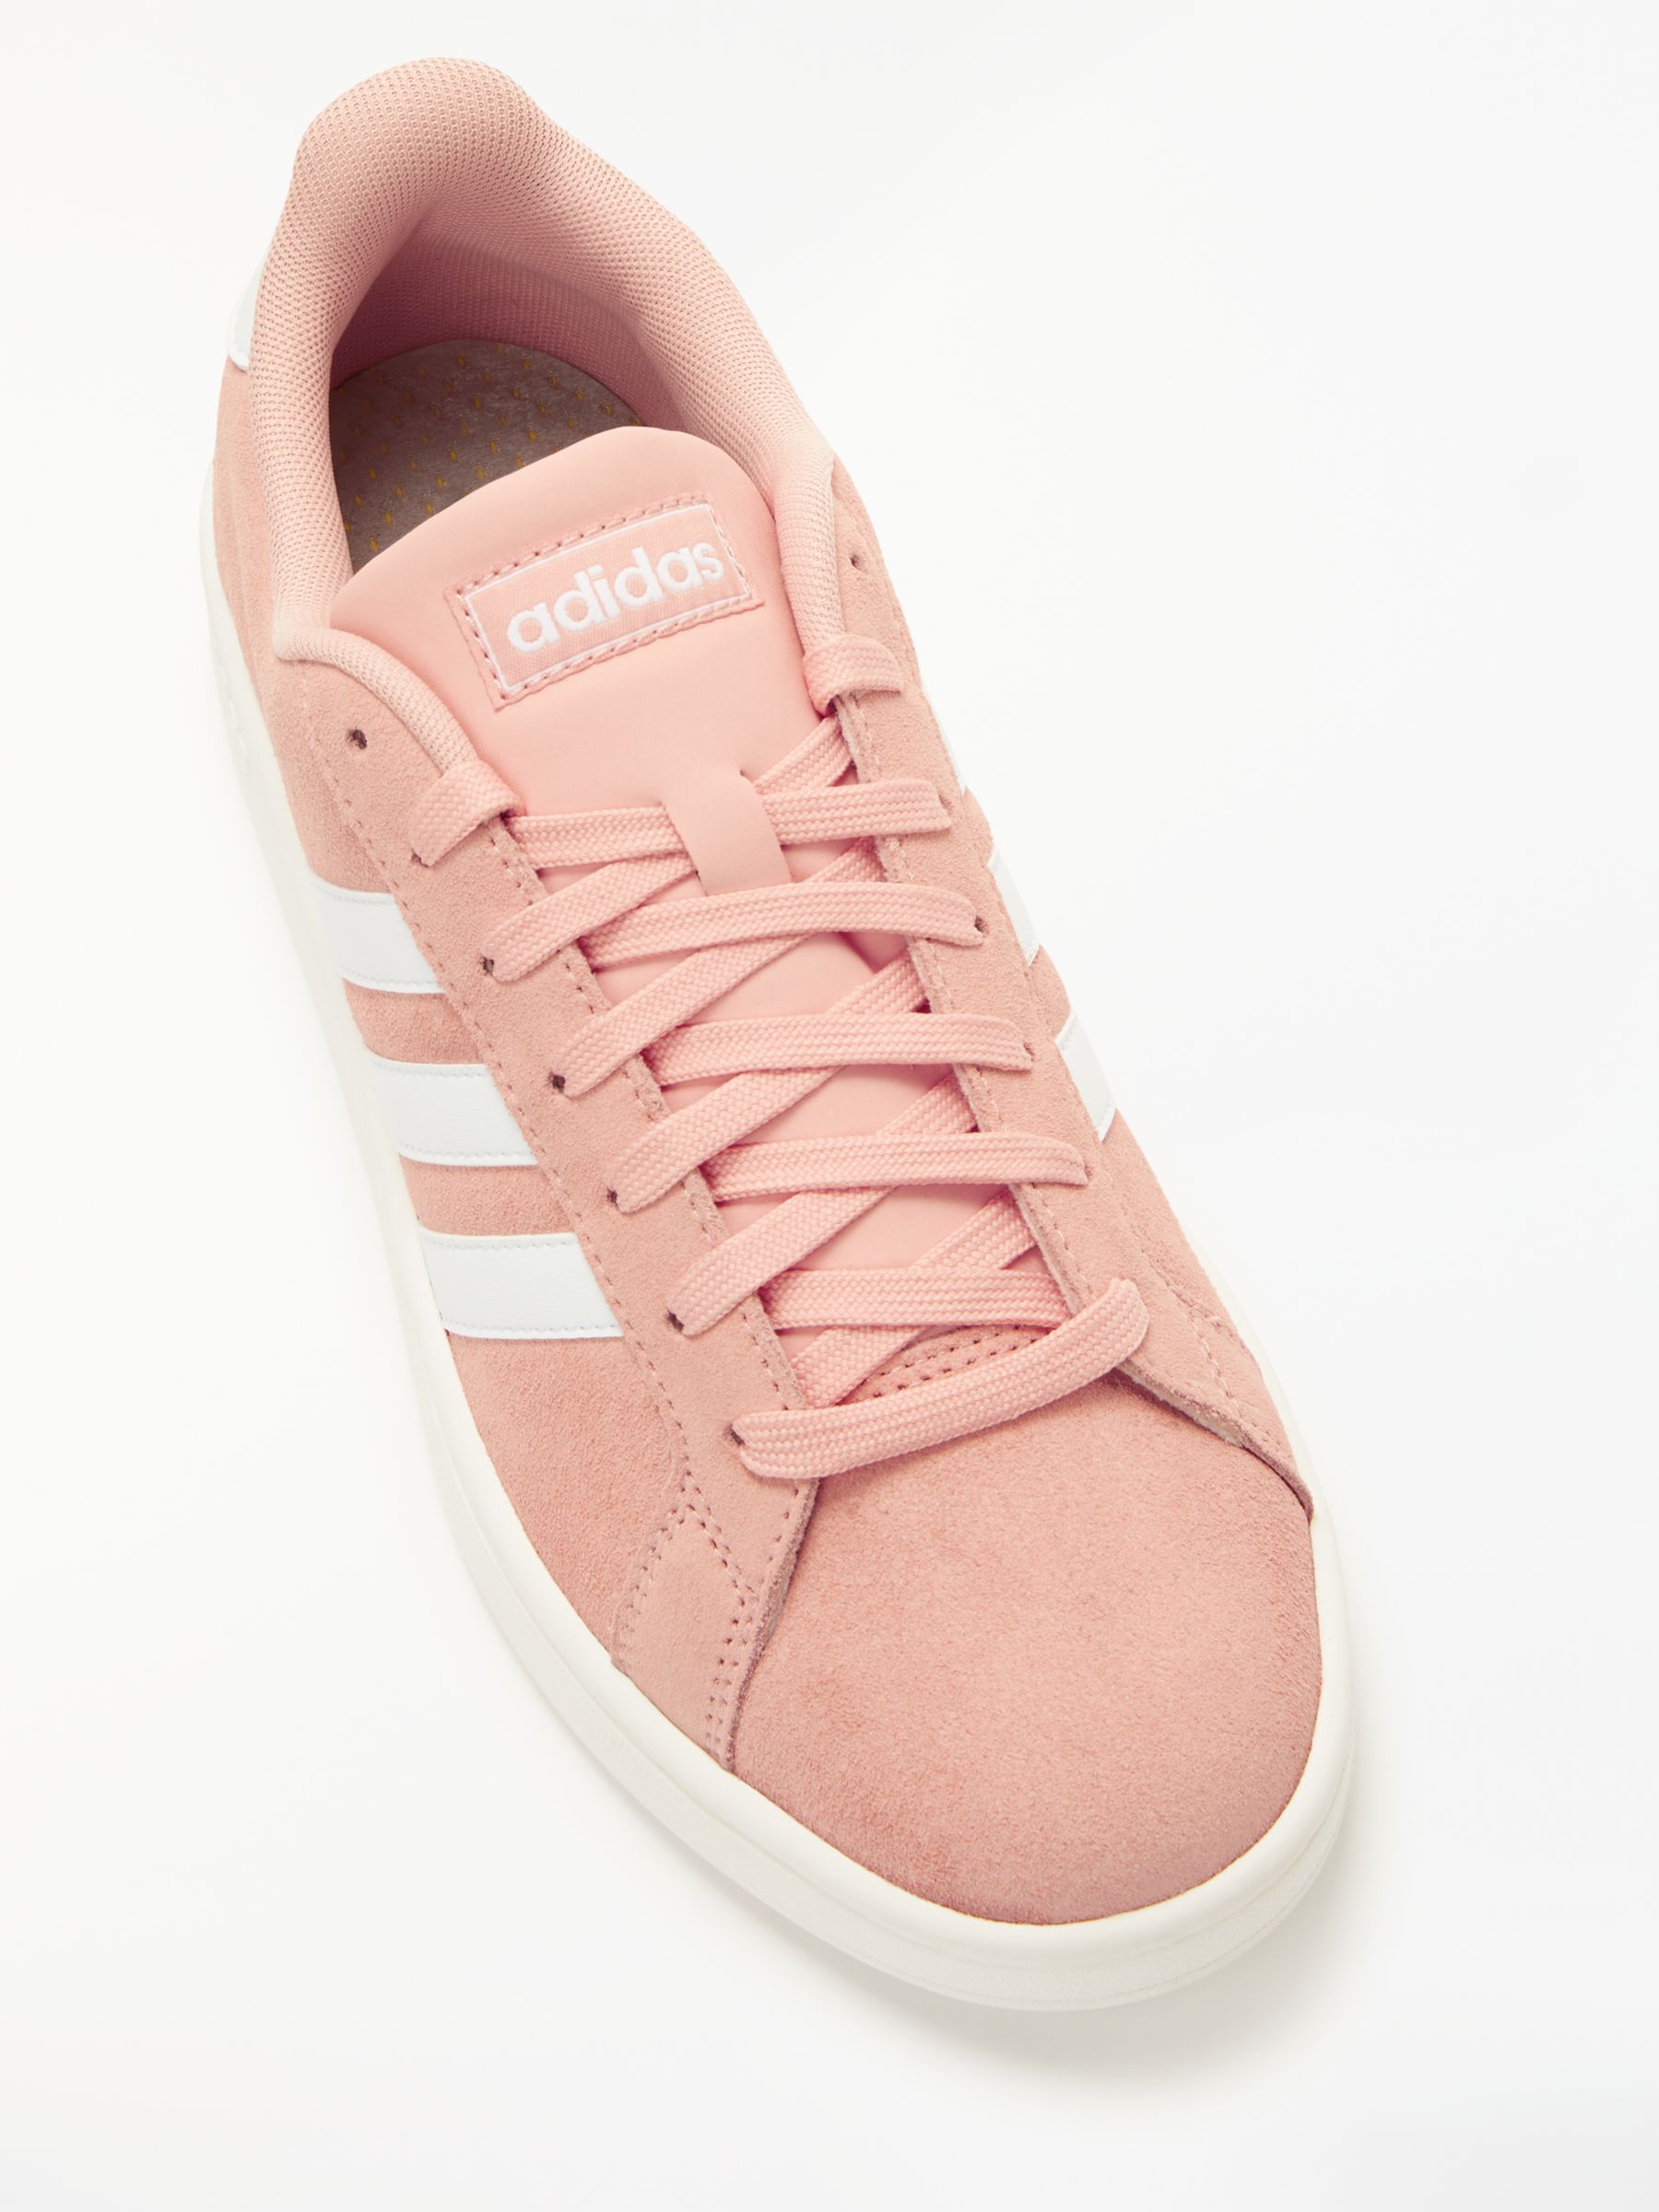 womens pink adidas trainers